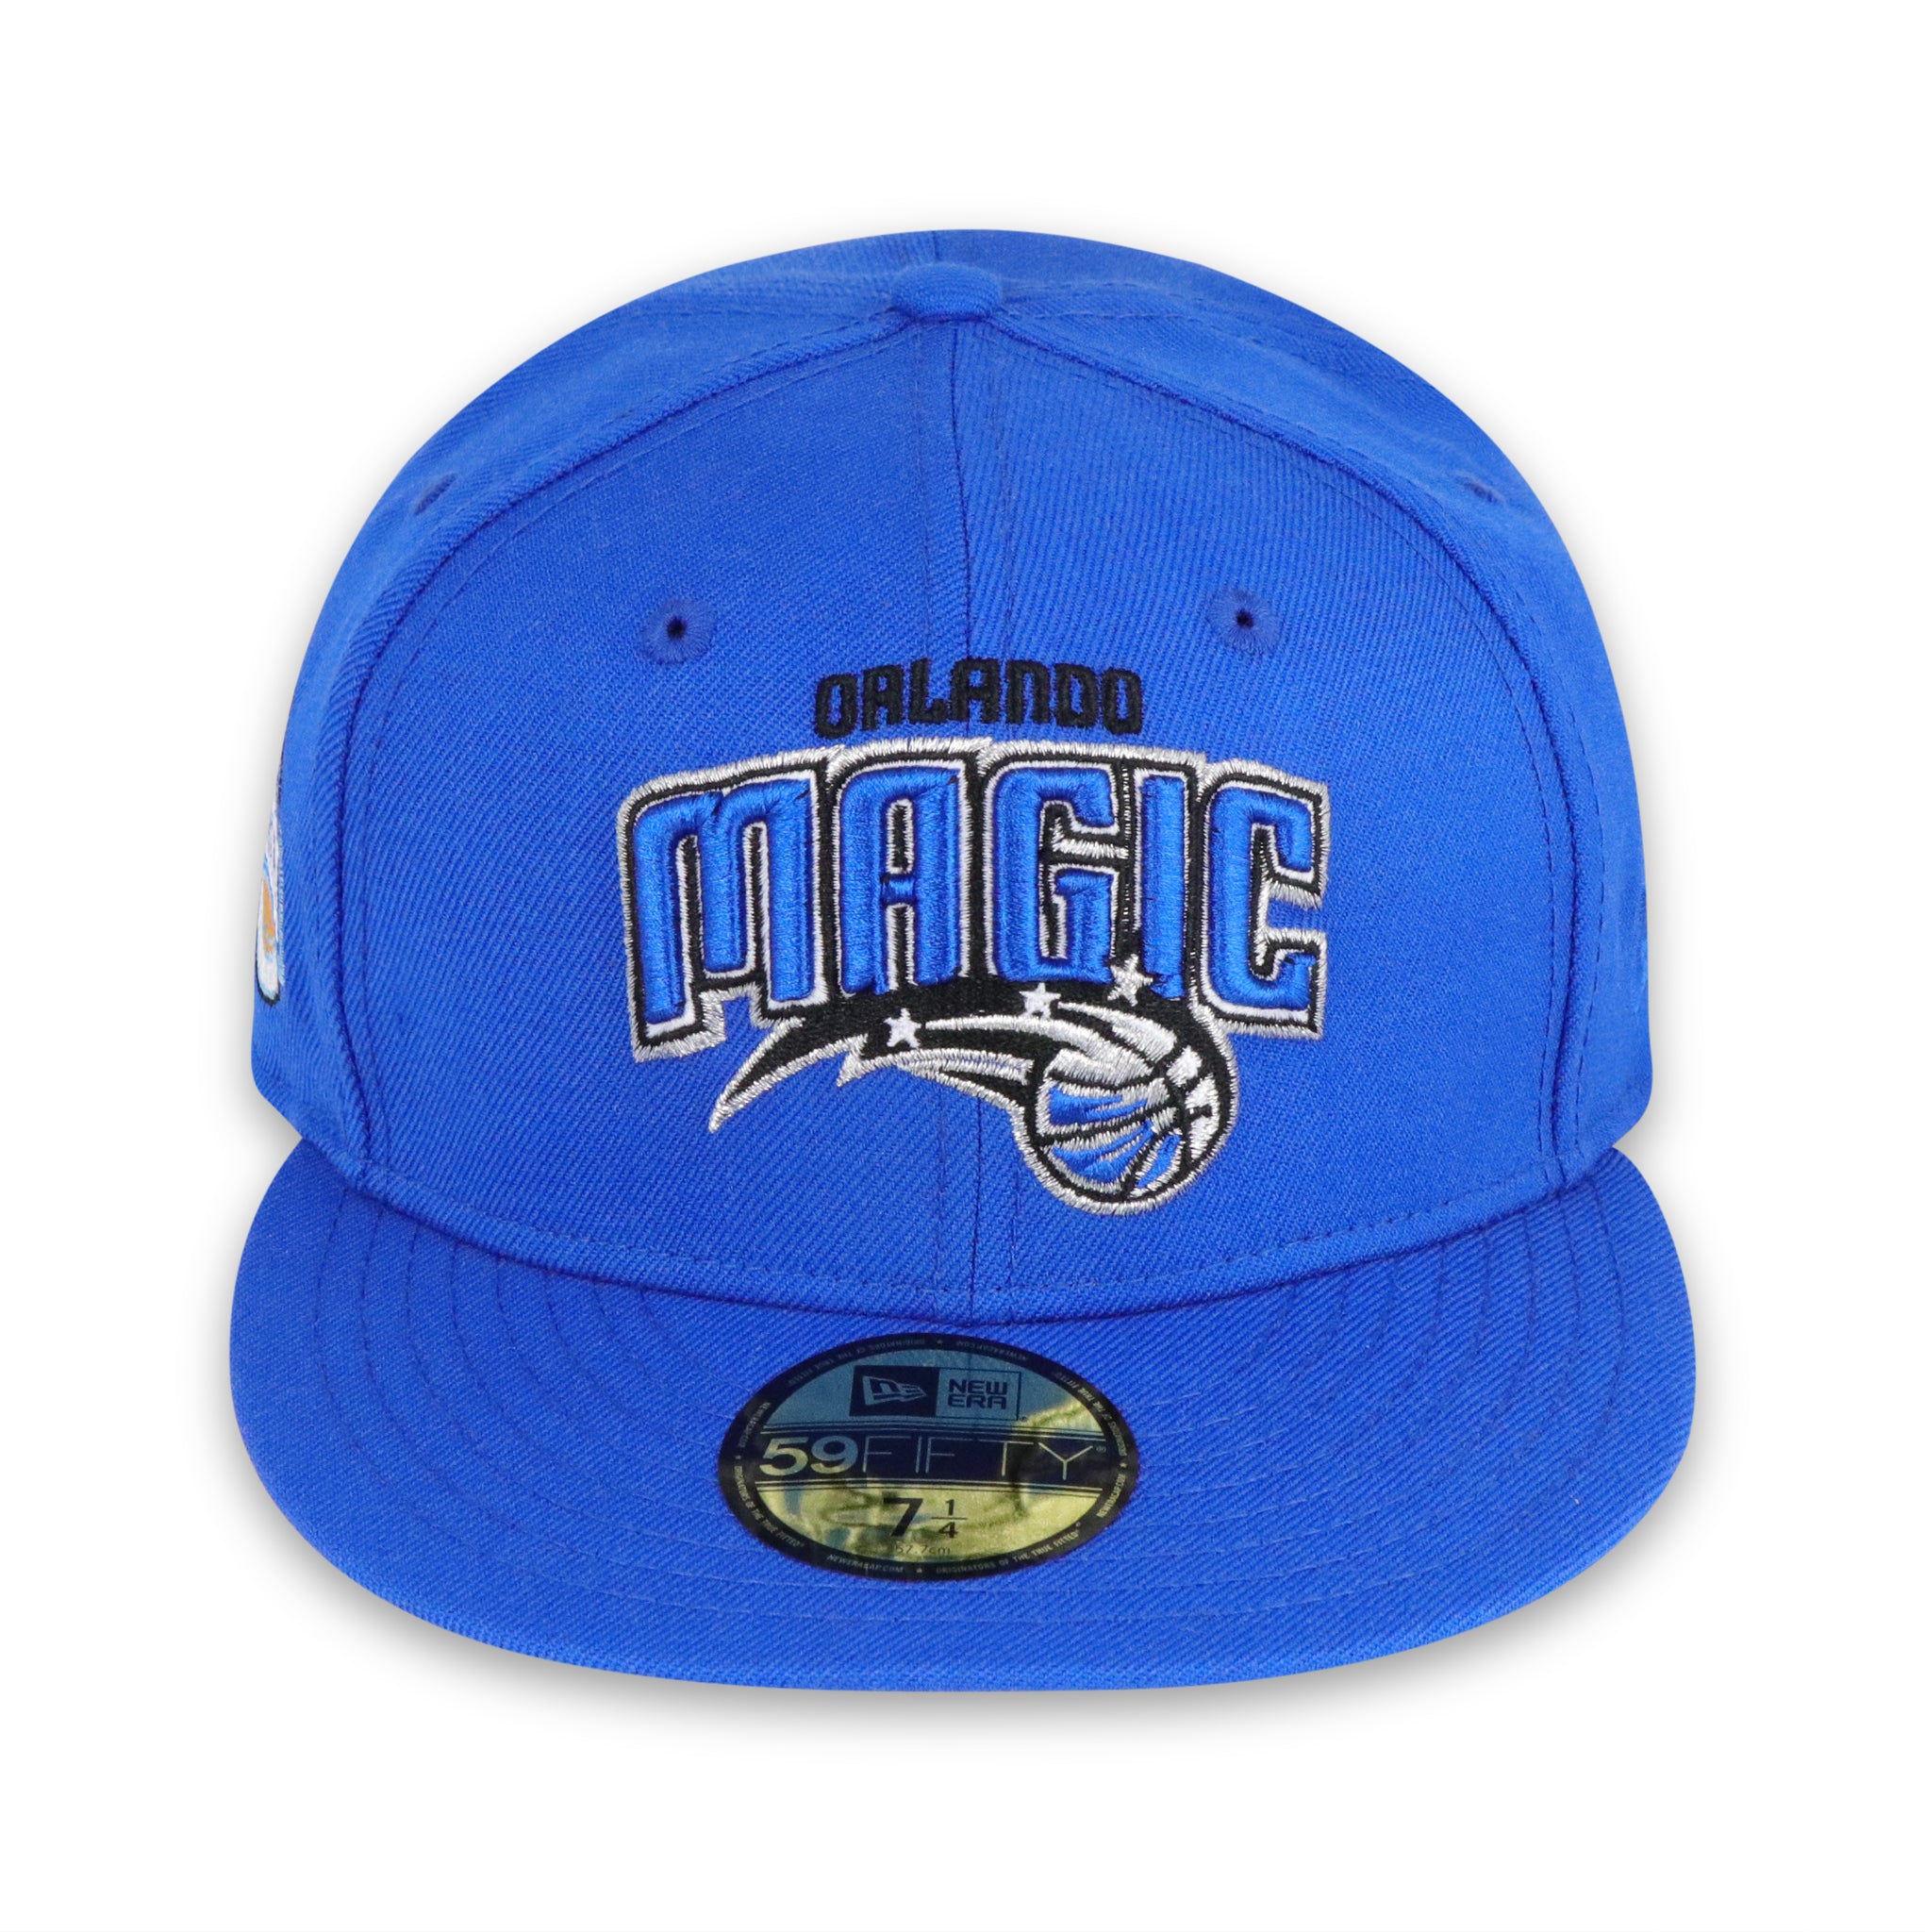 ORLANDO MAGIC "EASTERN CONFERENCE" NEW ERA 59FIFTY FITTED (AIR JORDAN 5 RETRO STEALTH)